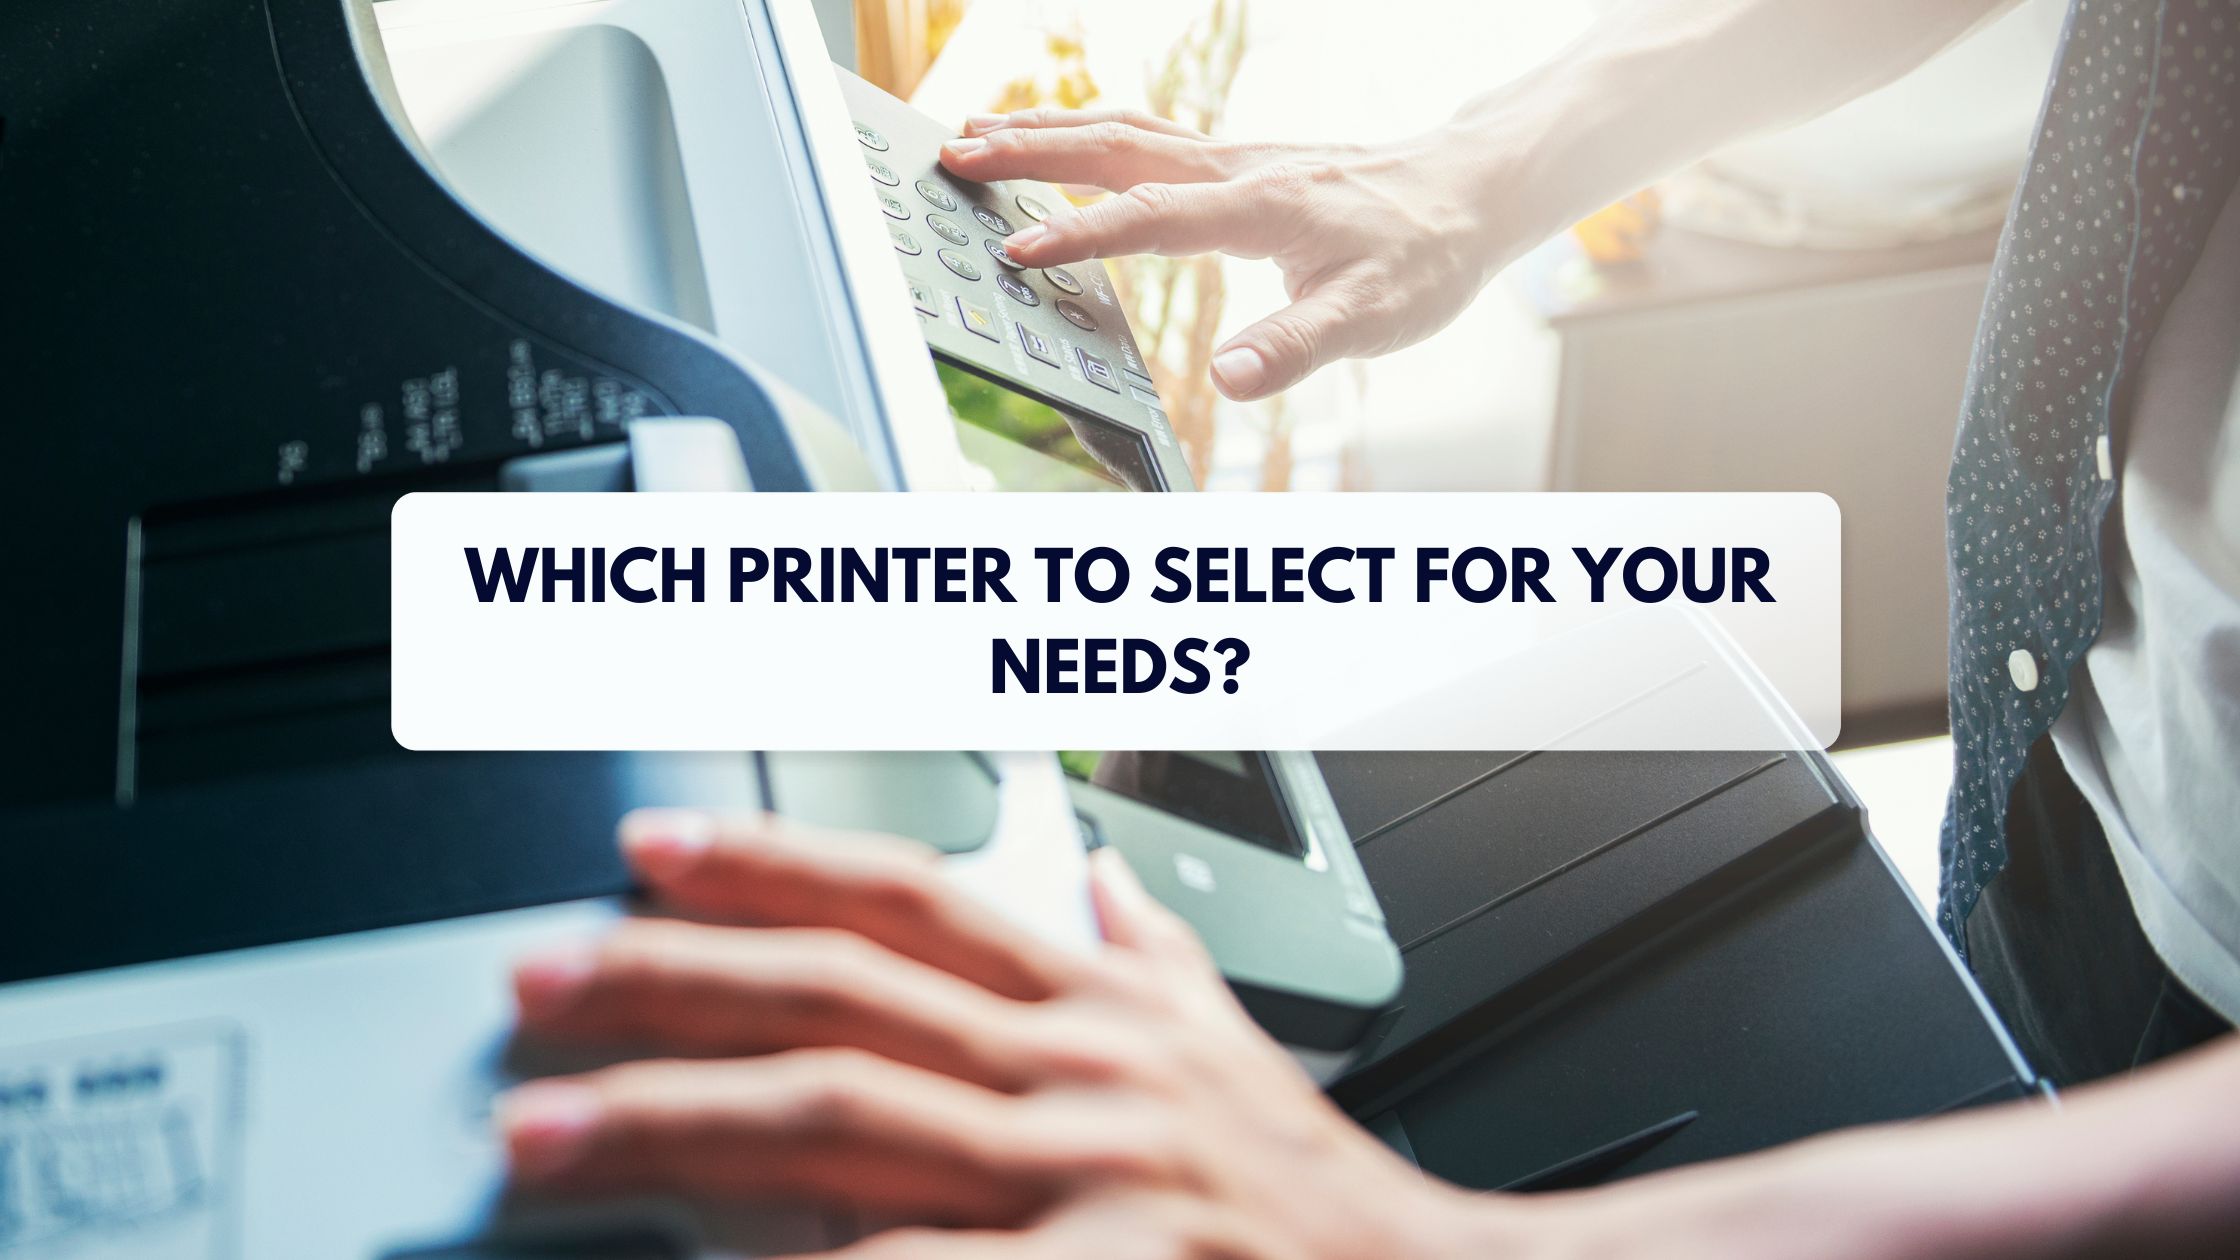 Which printer to select for your needs?